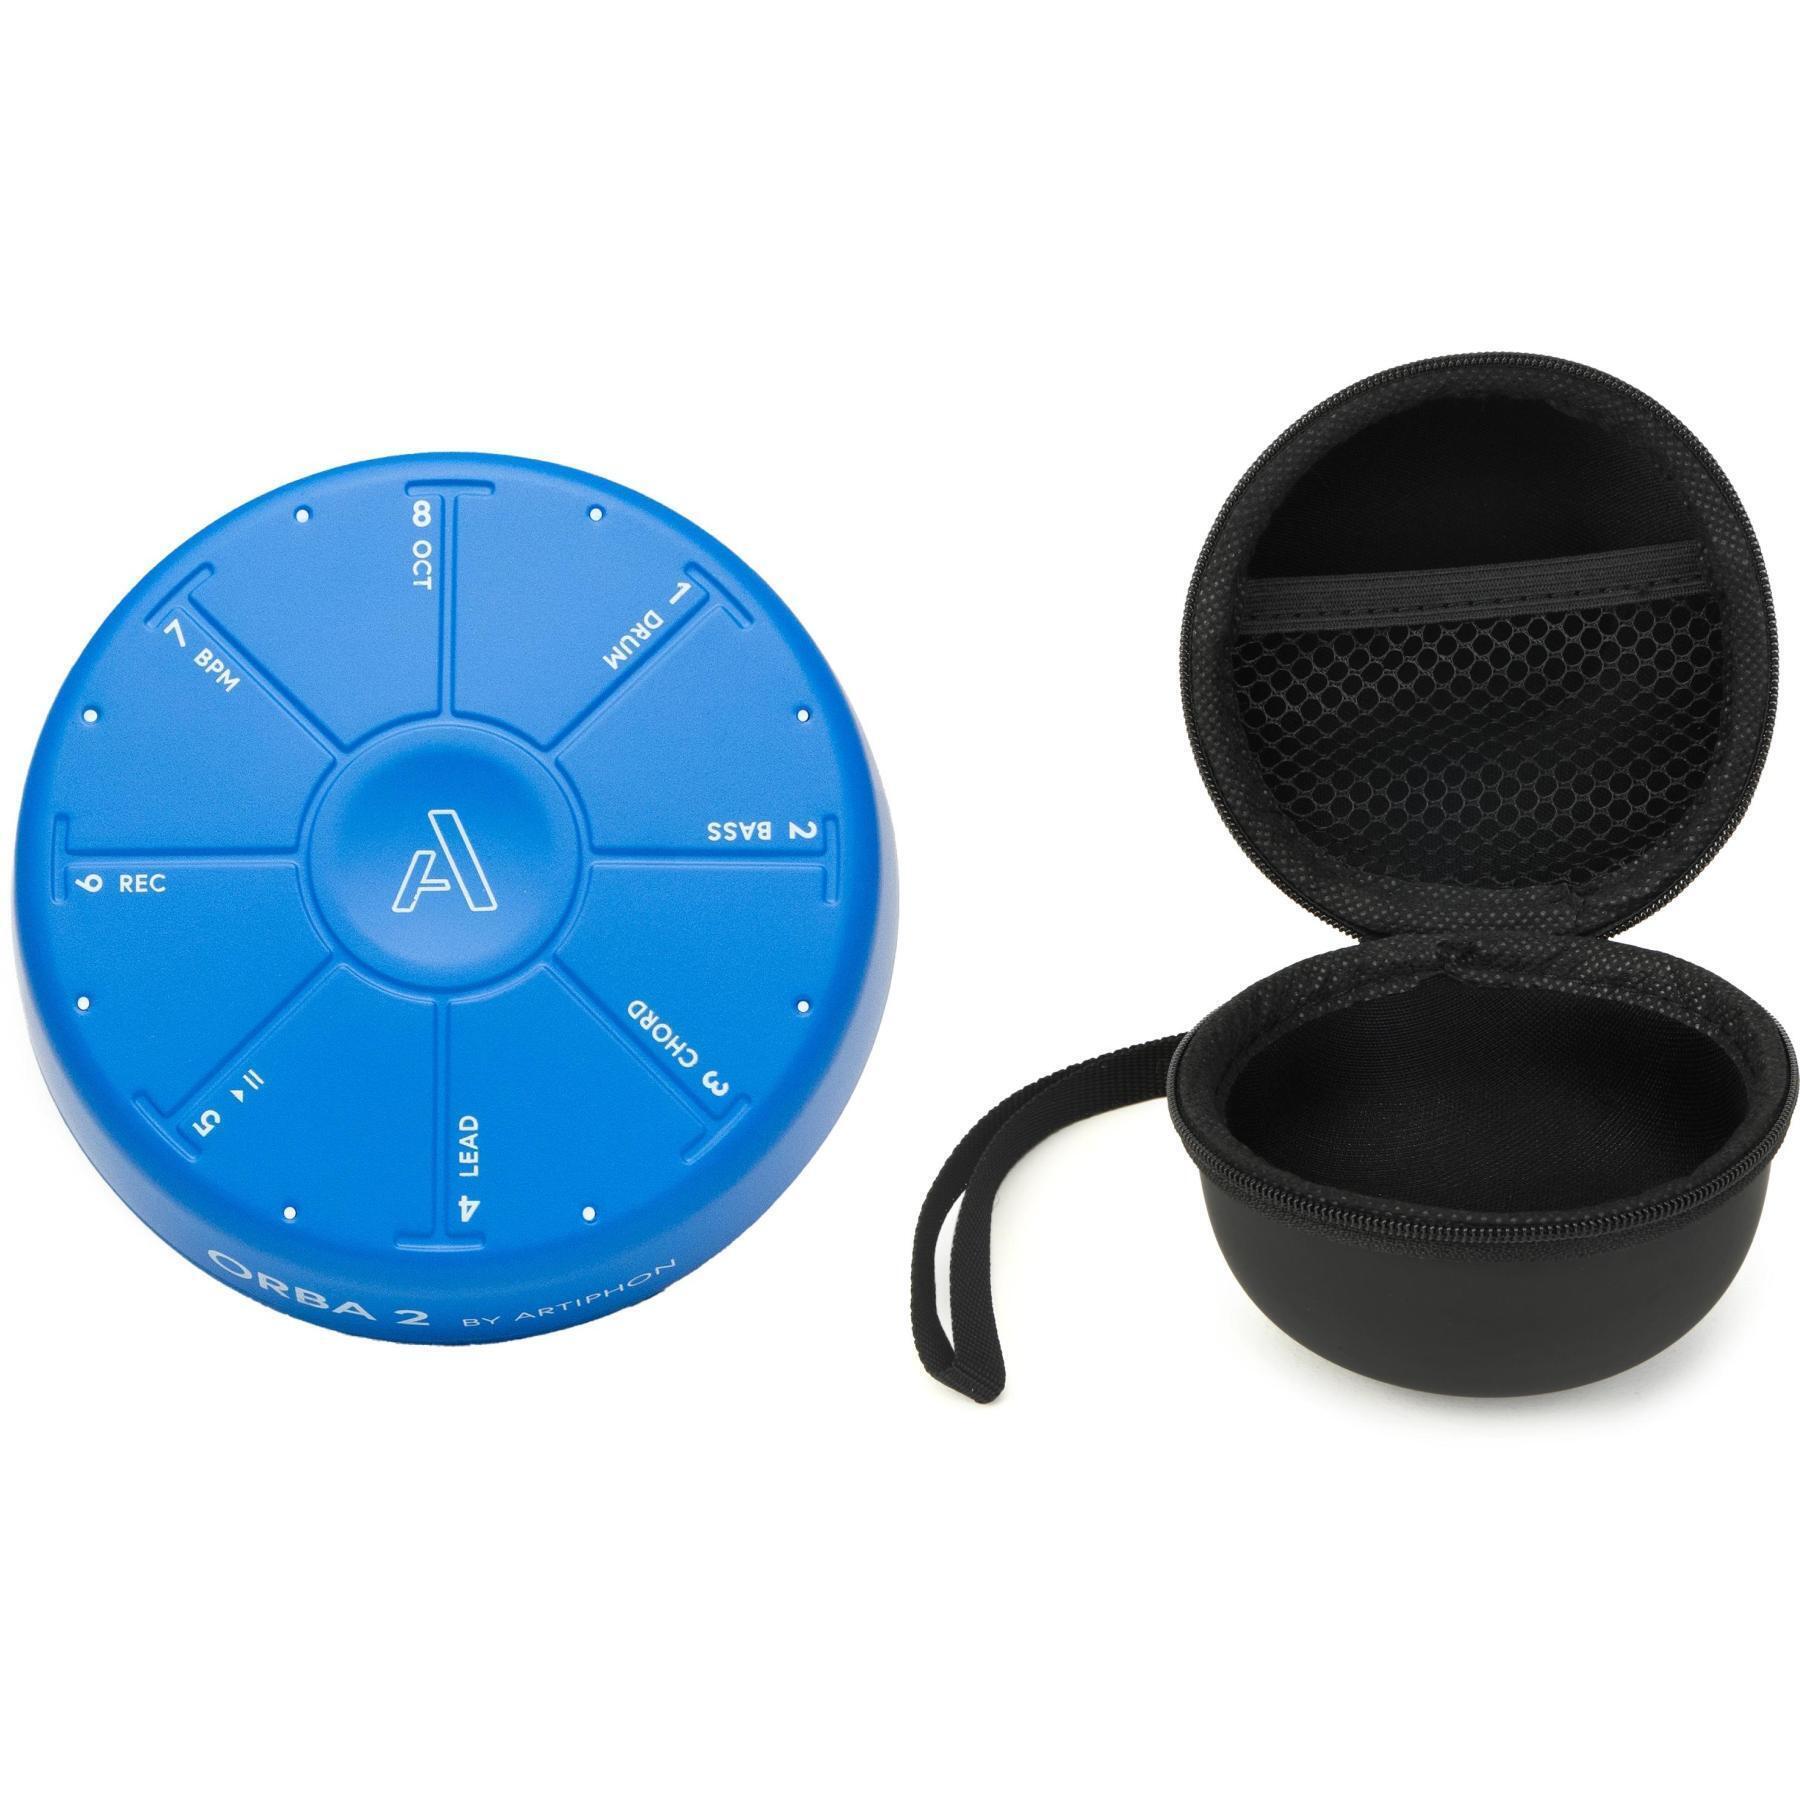 Artiphon Orba 2 - Blue with Case